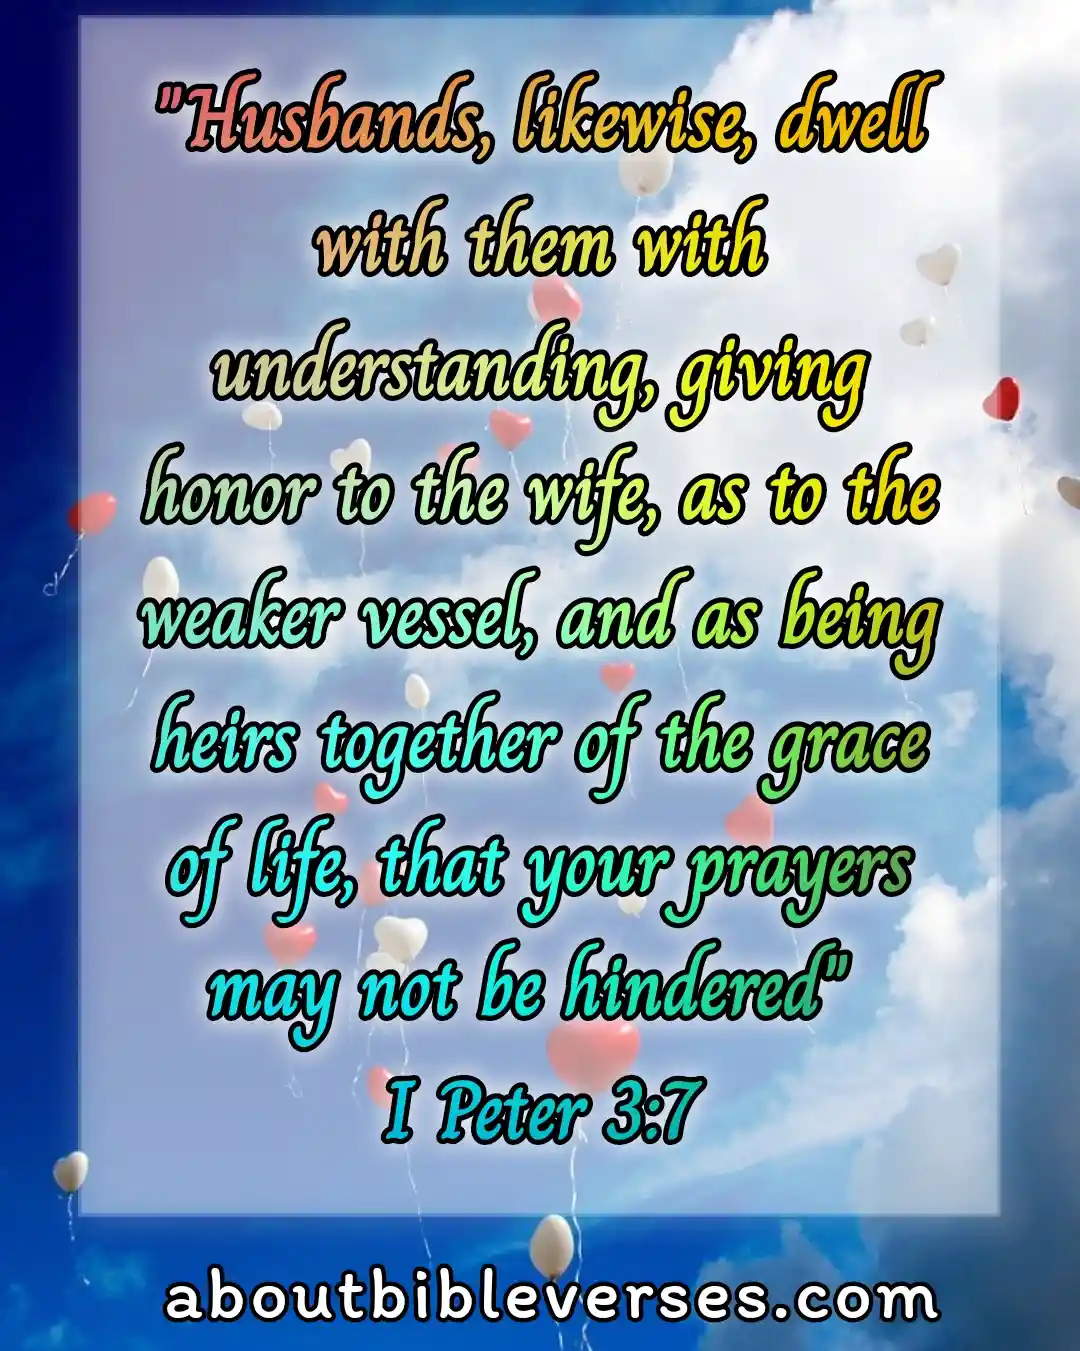 bible verses husband and wife relationship (1 Peter 3:7)